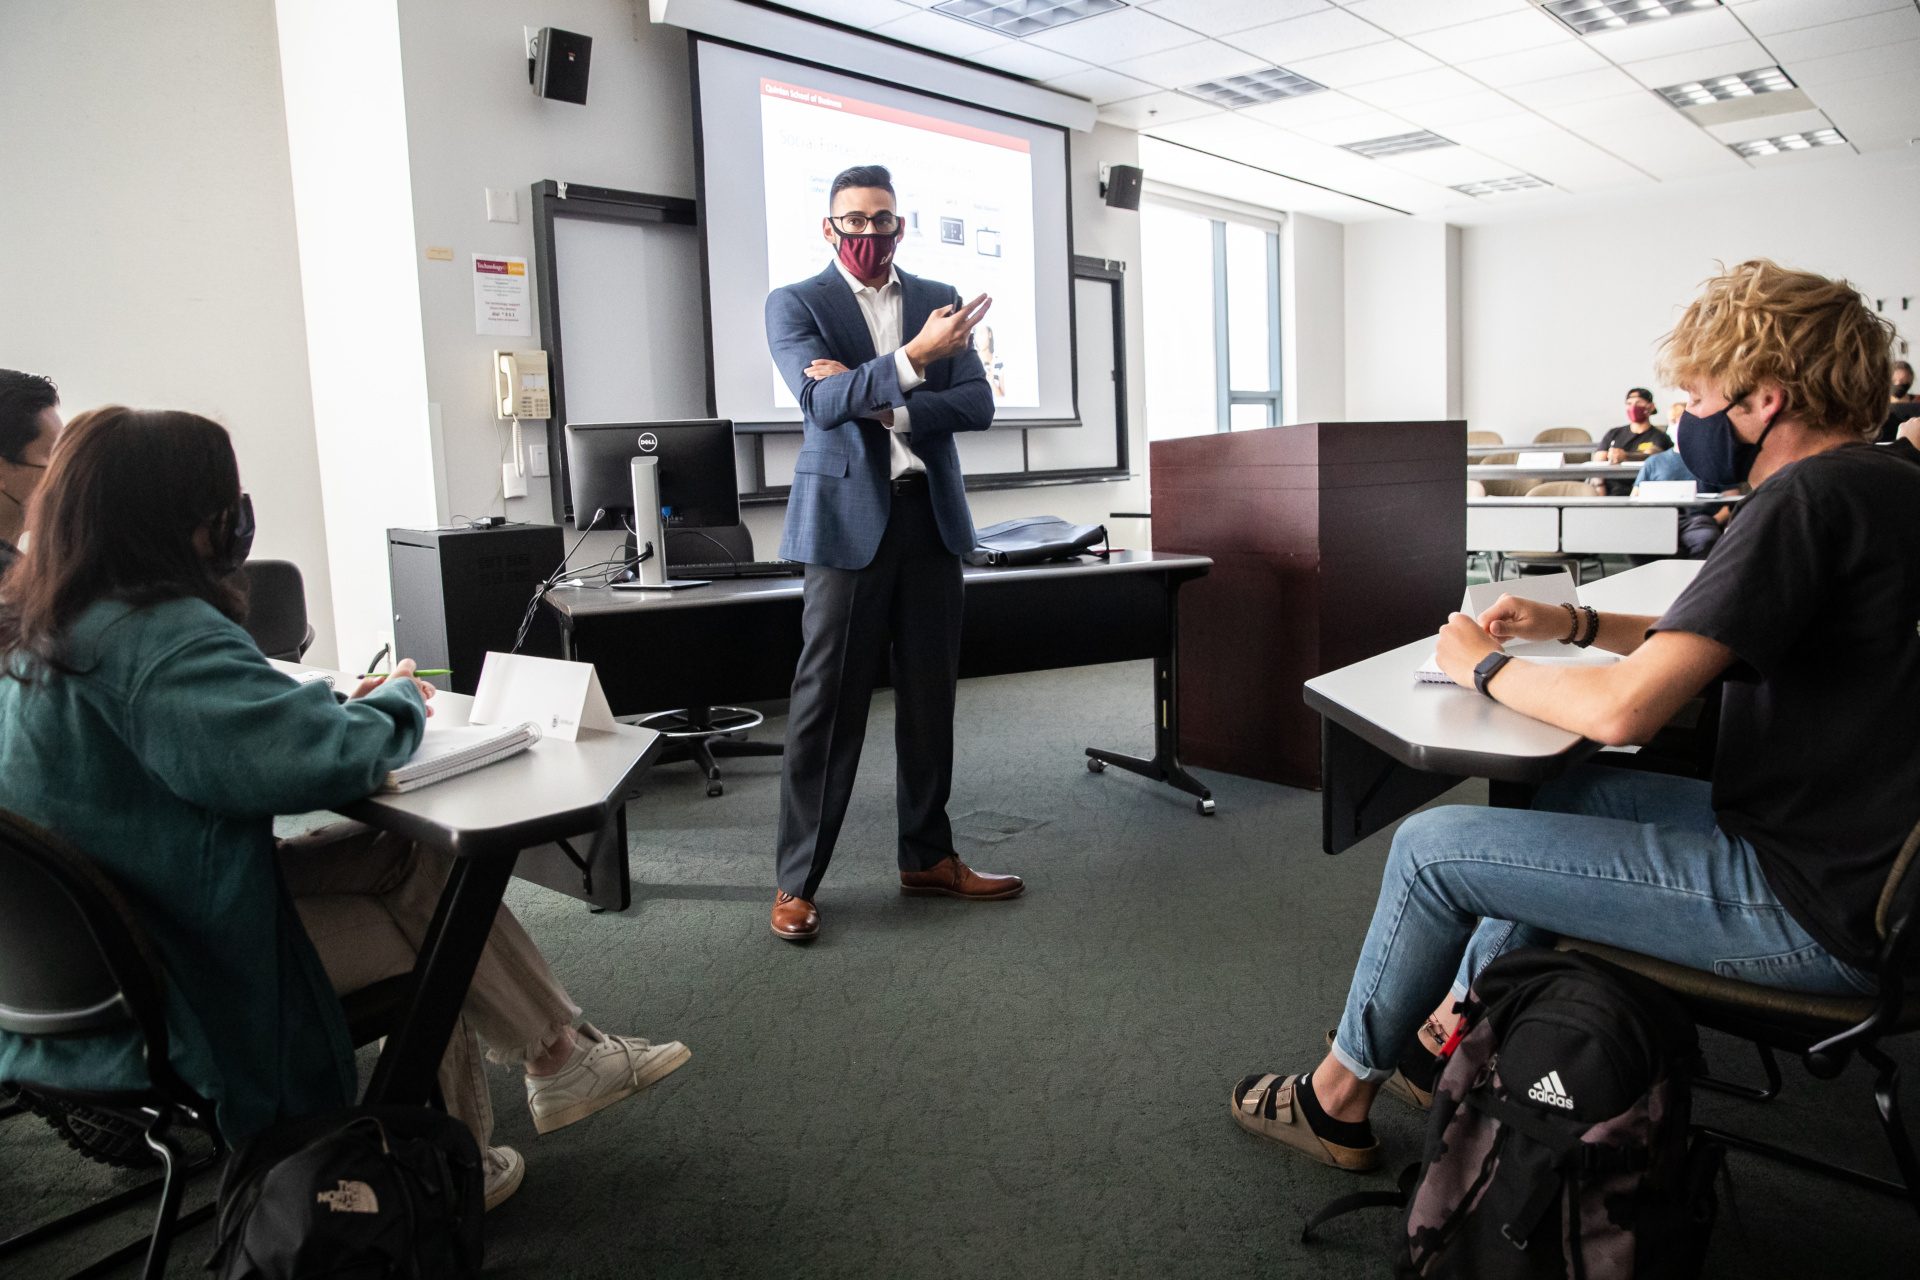 A man wearing a suit and a Loyola University Chicago mask crosses his arms in a classroom while standing in front of a Powerpoint presentation